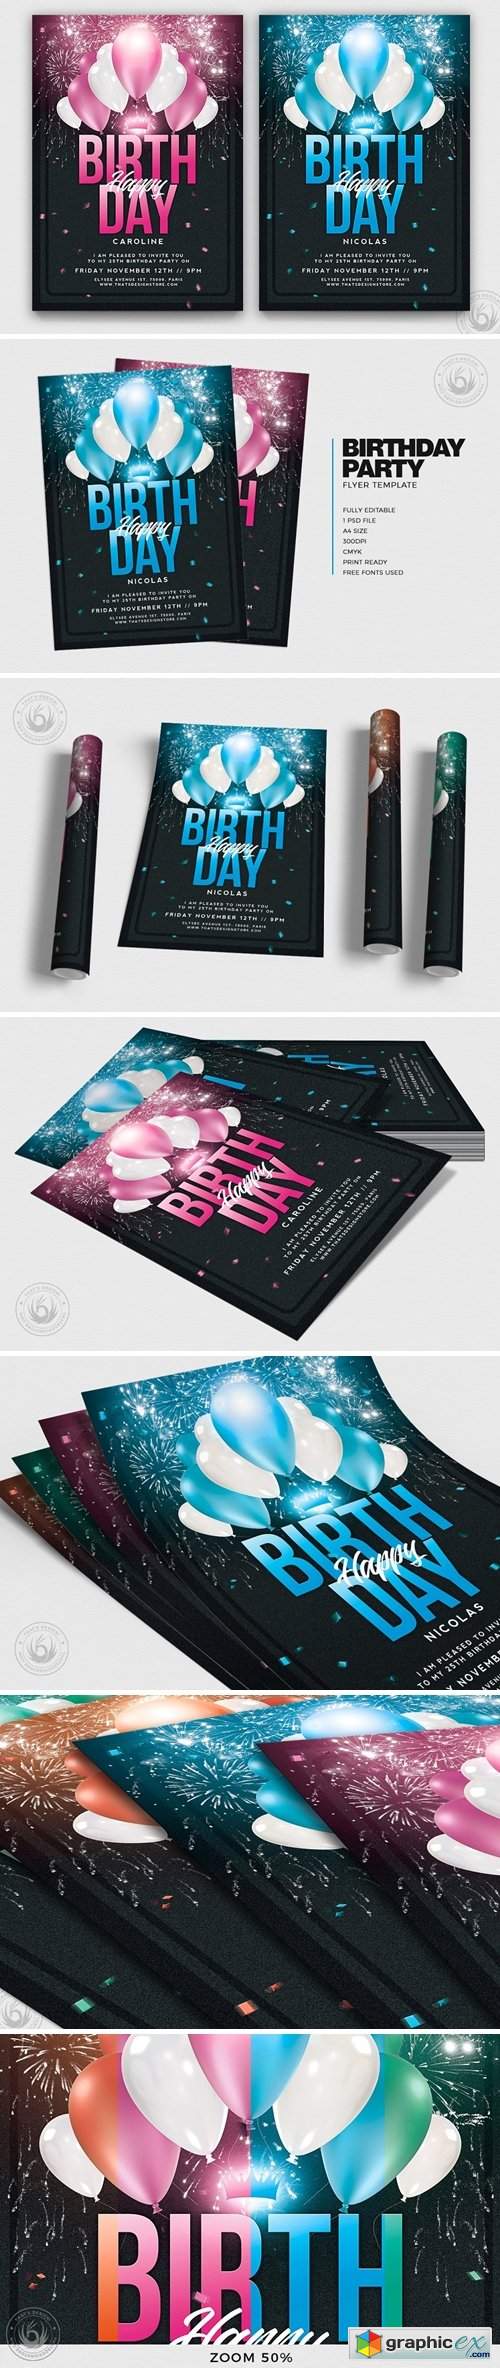 Birthday Party Flyer Template 3752670